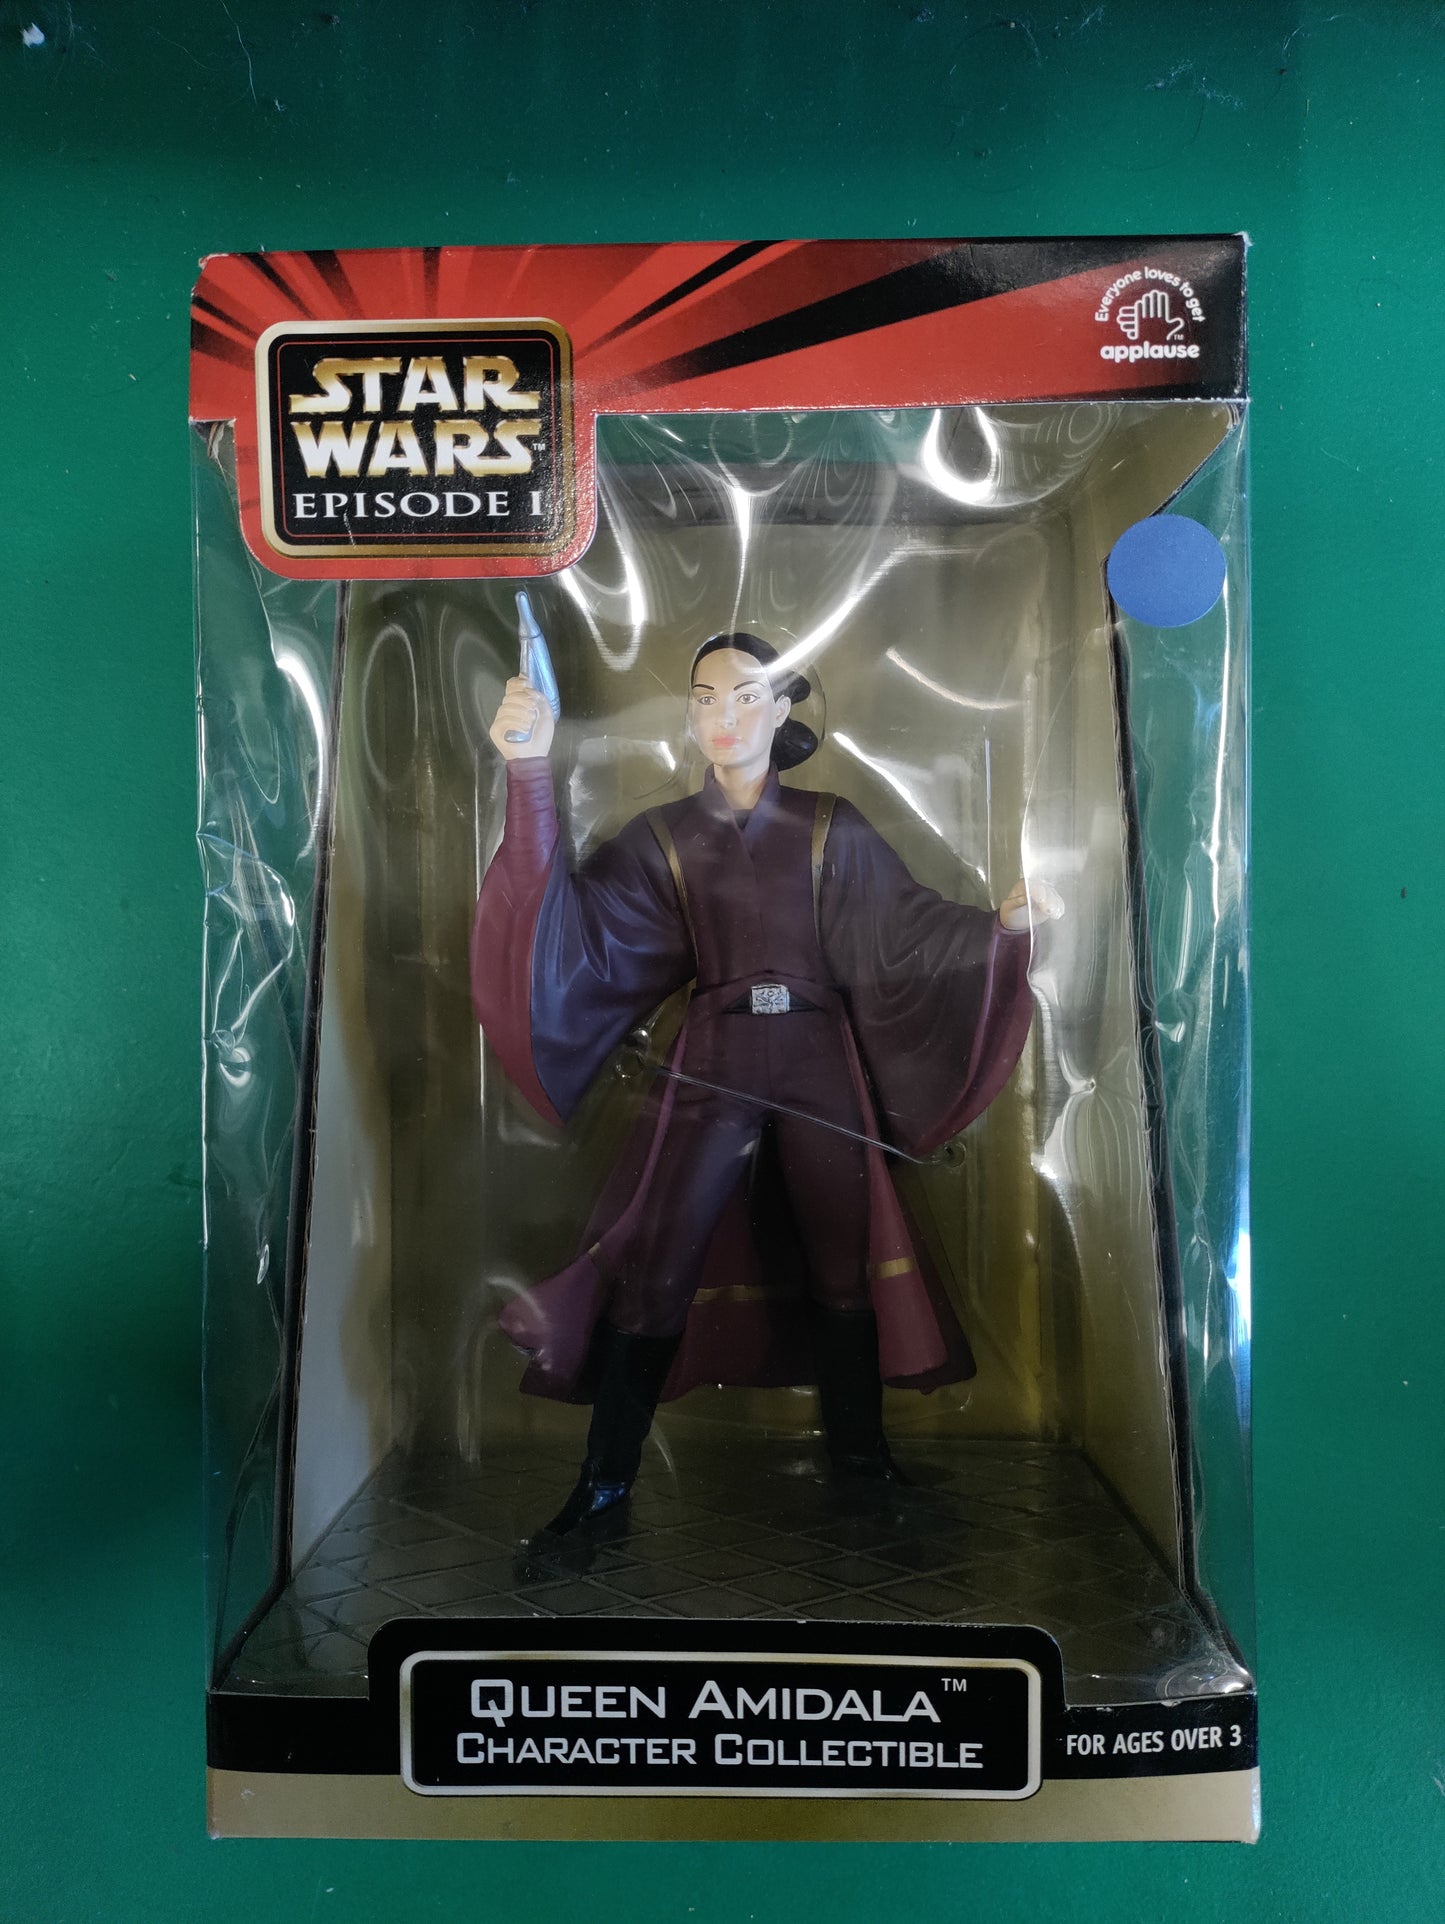 Star Wars Episode 1 Queen Amidala Character Collectible